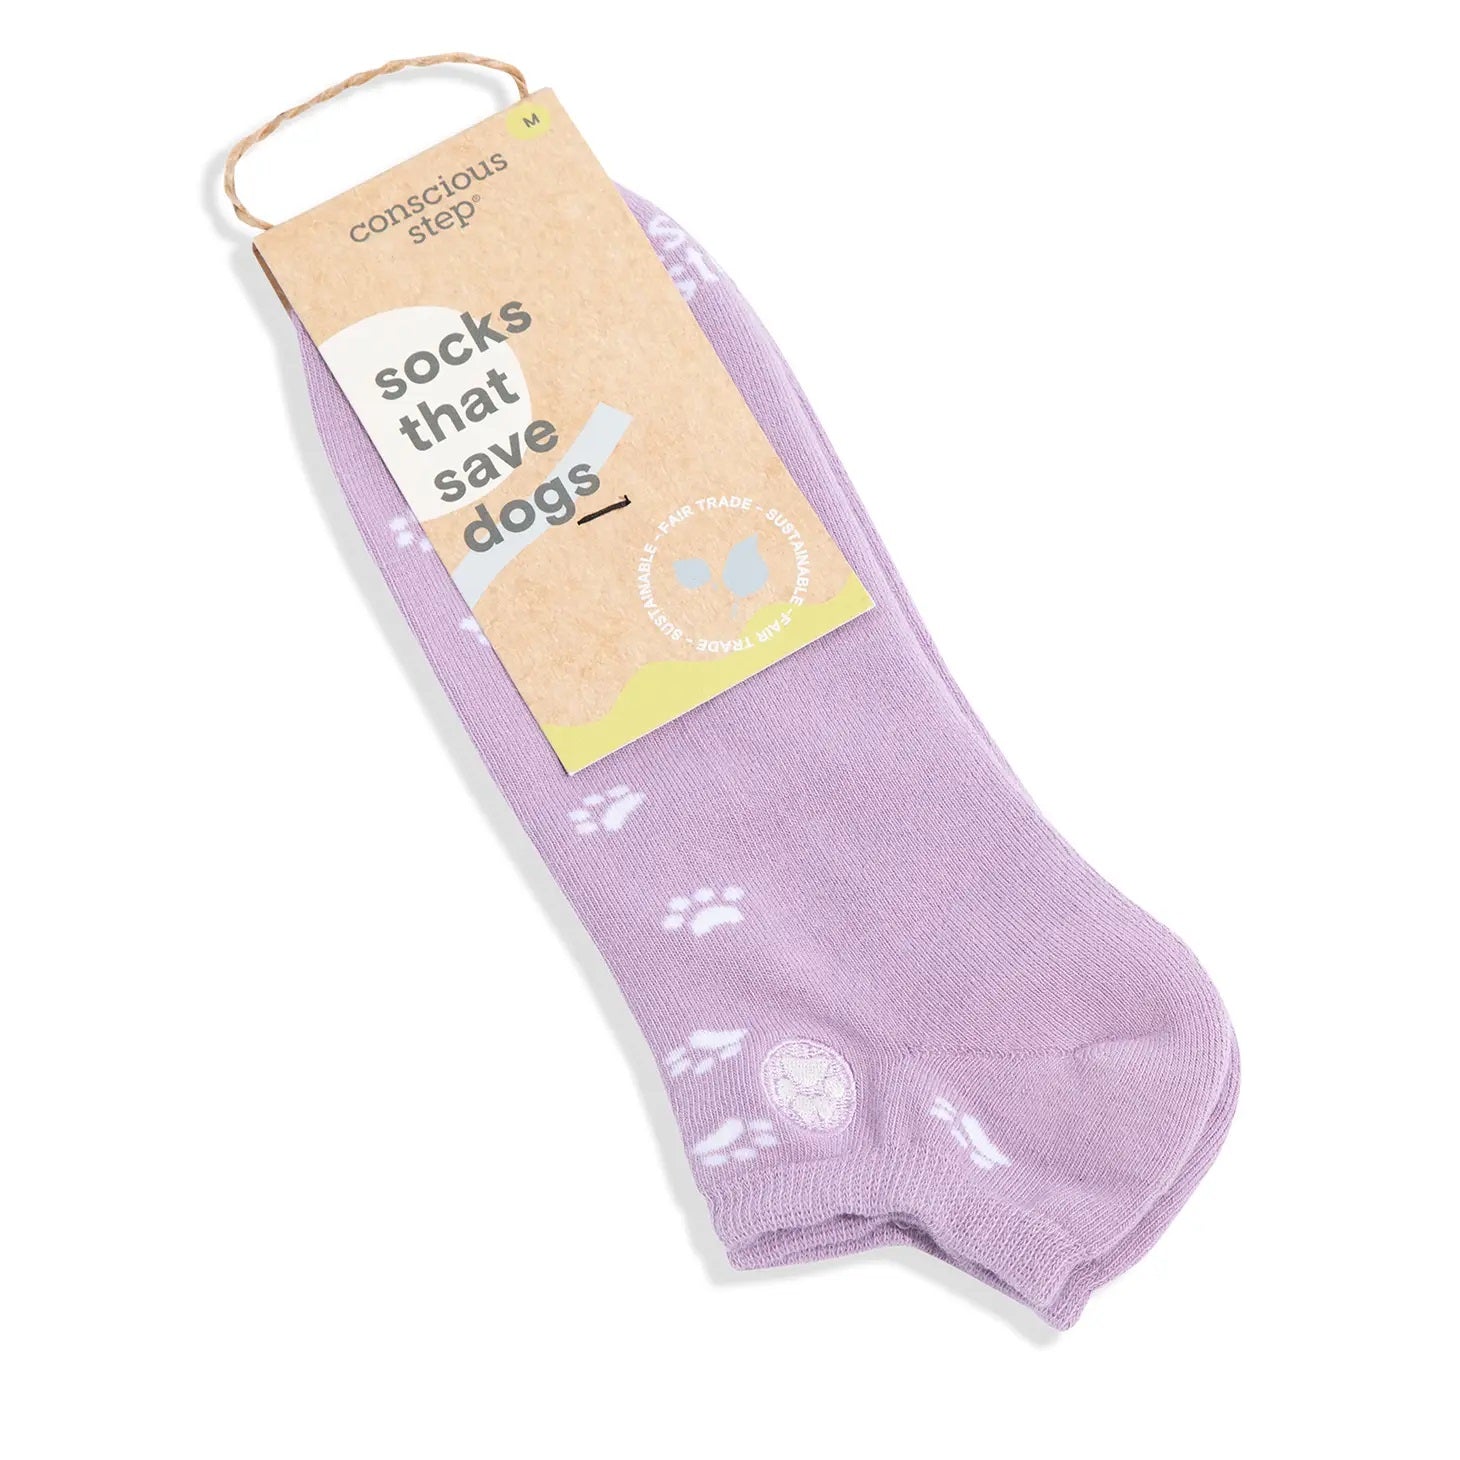 Conscious Step, Unisex Ankle Socks that Save Dogs - Lavender Paws